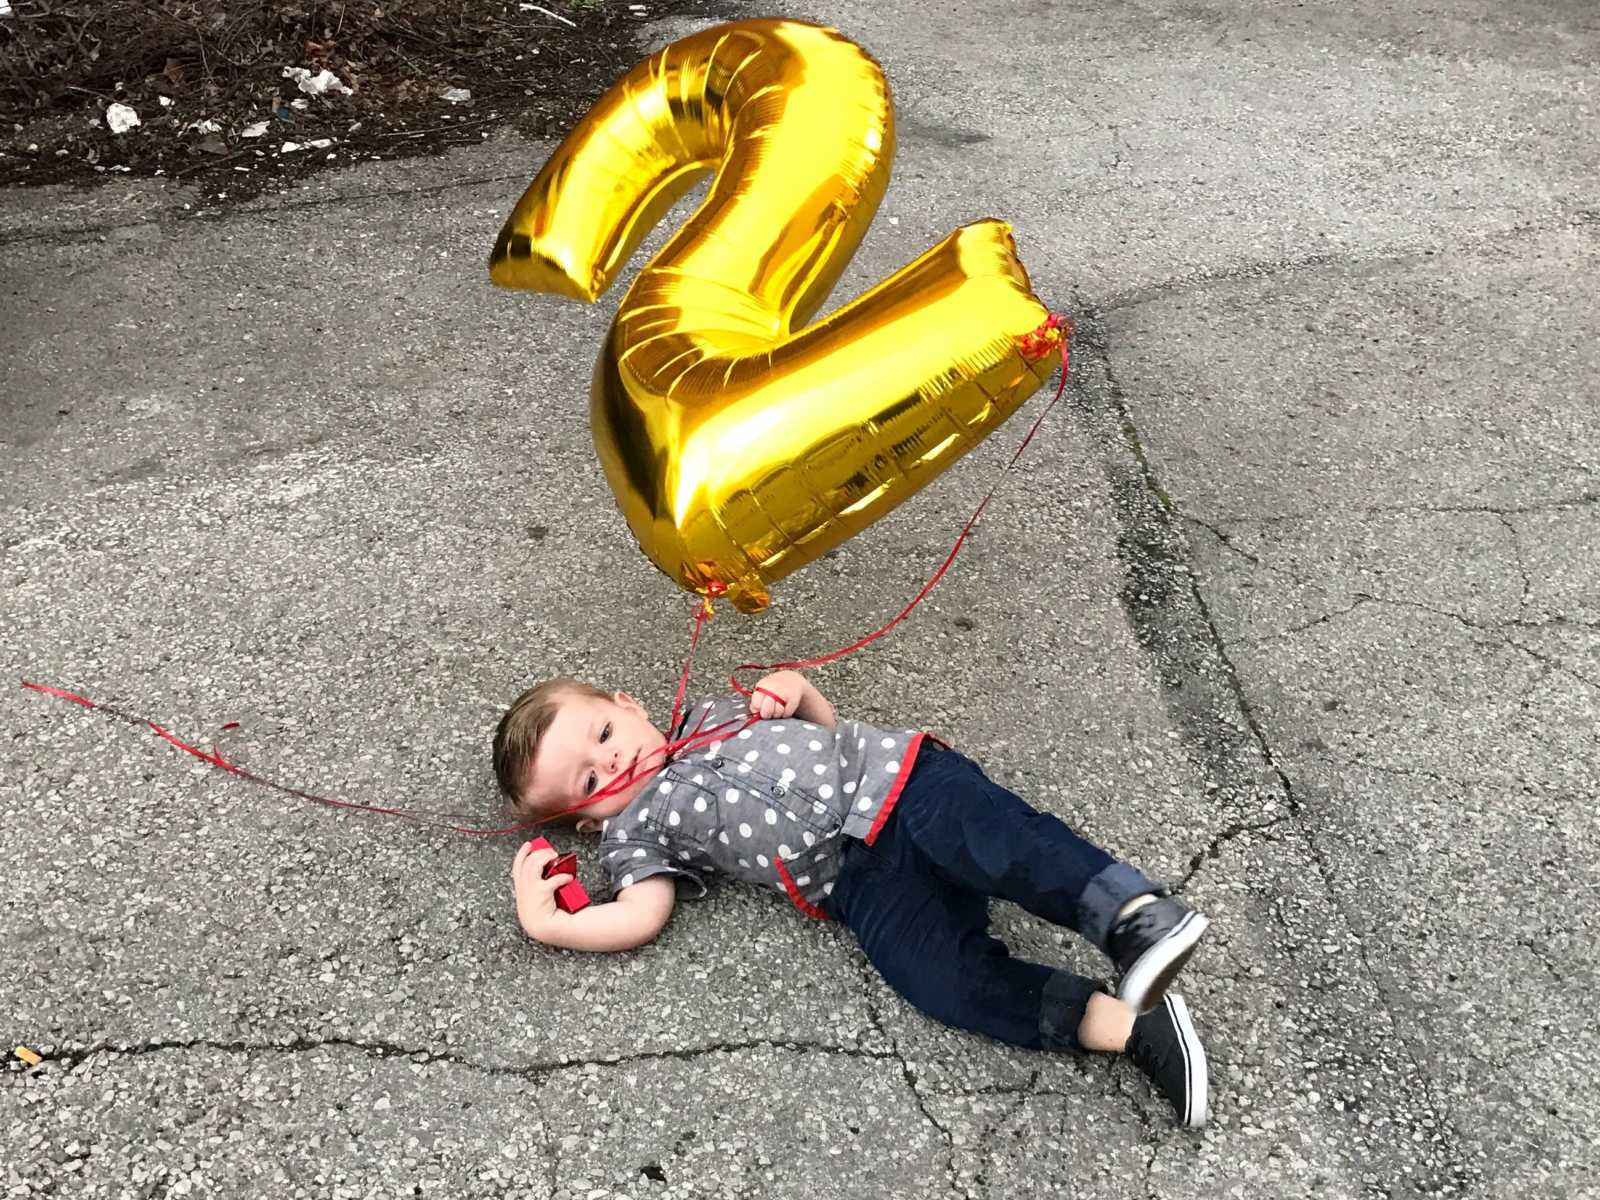 Toddler lays on his back in driveway holding on to large gold balloon that is in shape of number 2